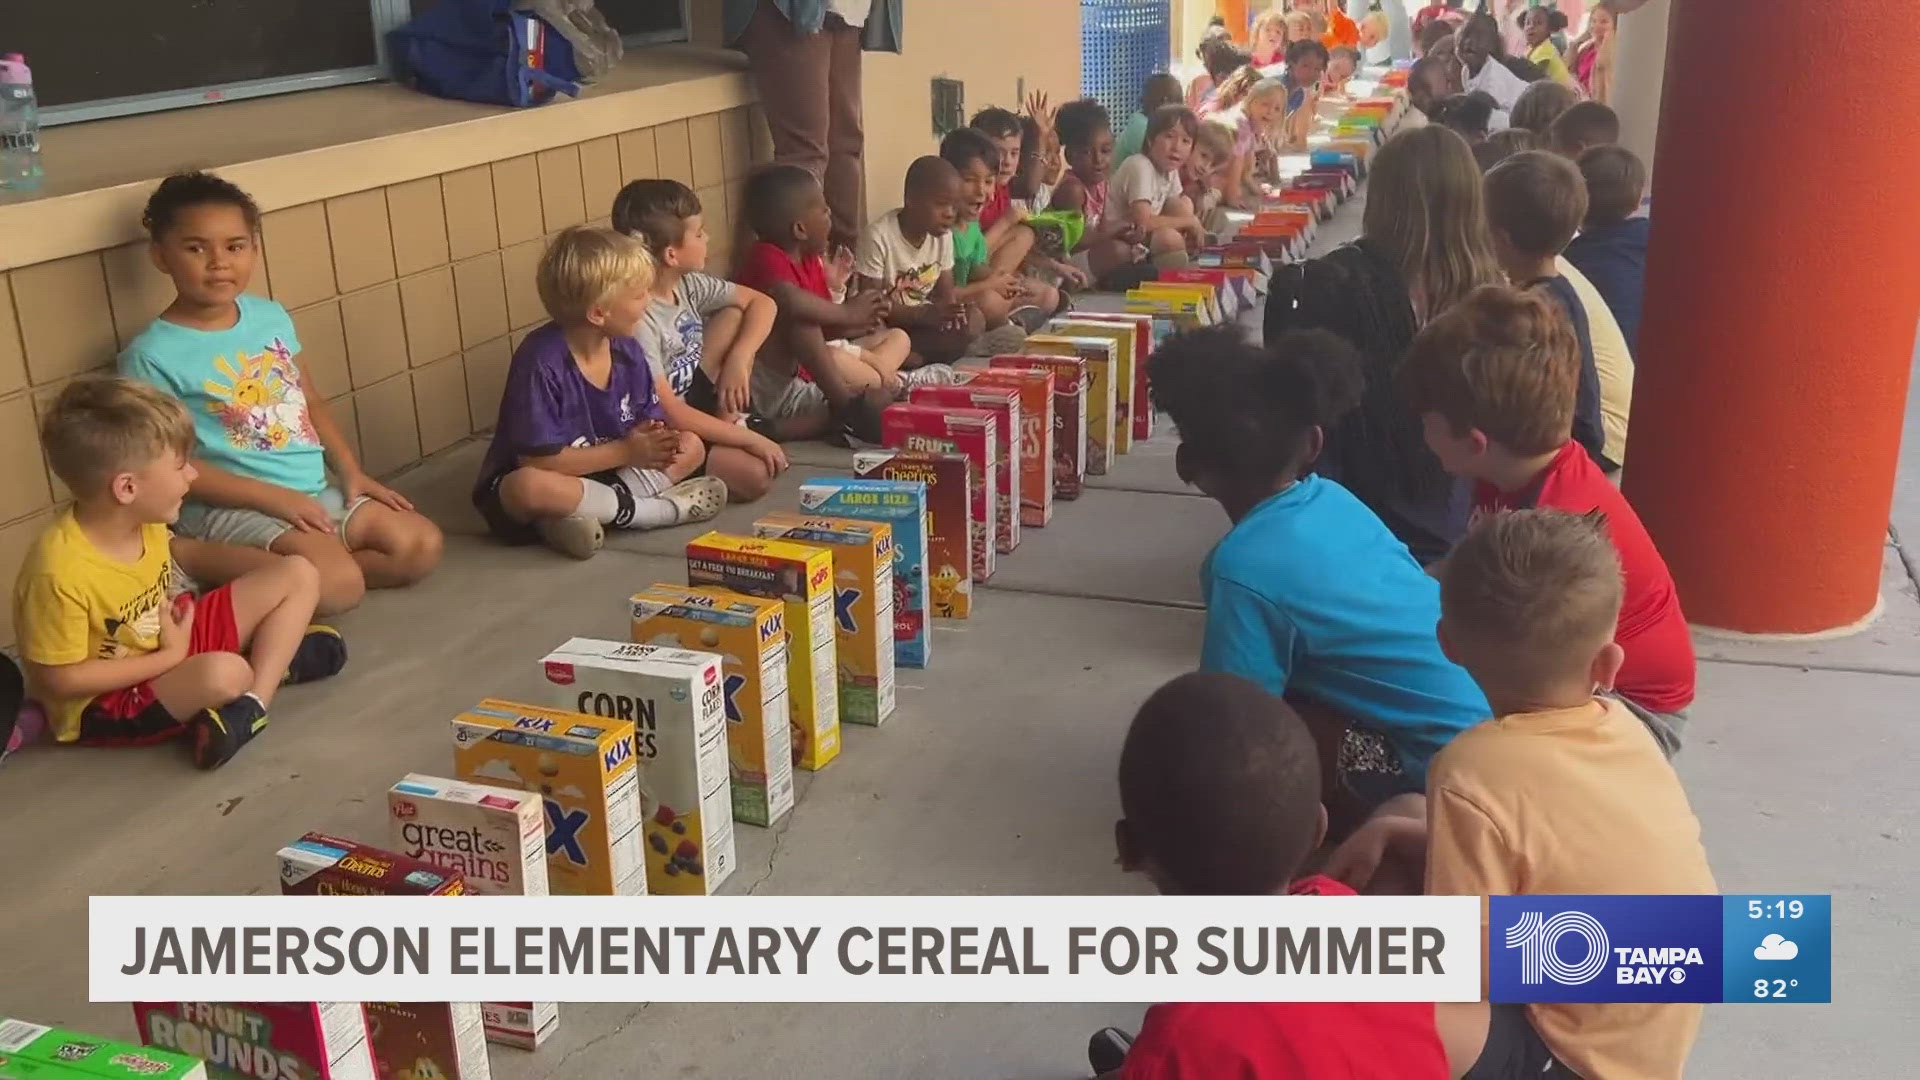 Jamerson Elementary School students collected more than 1,000 boxes of cereal that will go to help feed hungry kids.